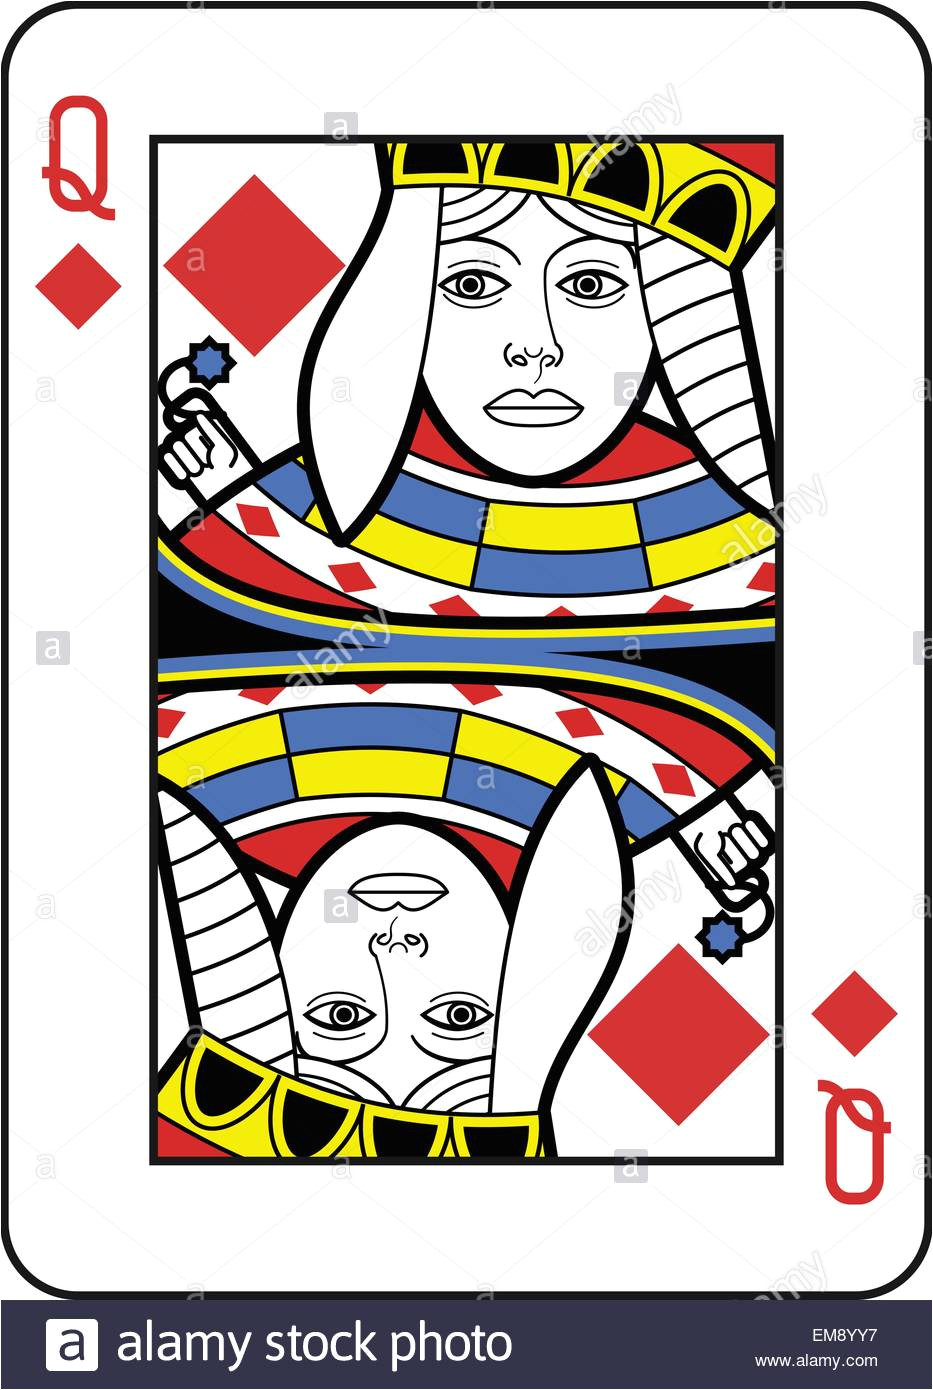 queen of diamonds inside the card frame realized in a essential style em8yy7 jpg